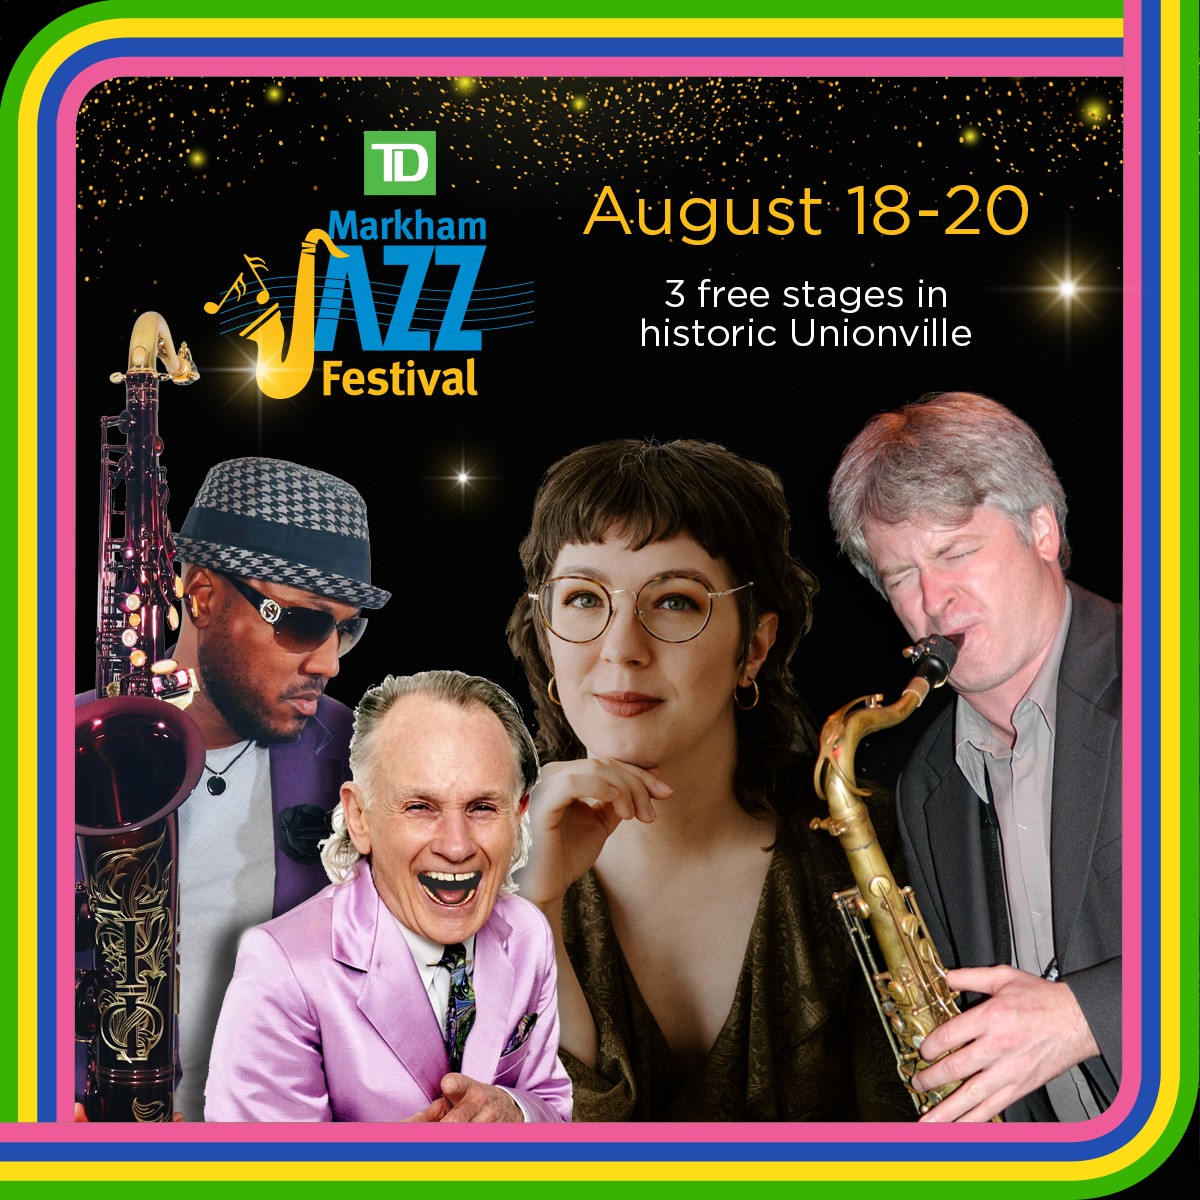 The *26th* TD Markham Jazz Festival runs the weekend of Aug. 18-20, 2023. Join us in quaint, historical Unionville for some world-class jazz, blues, Afro-Cuban, world, big band and more! markhamjazzfestival.com